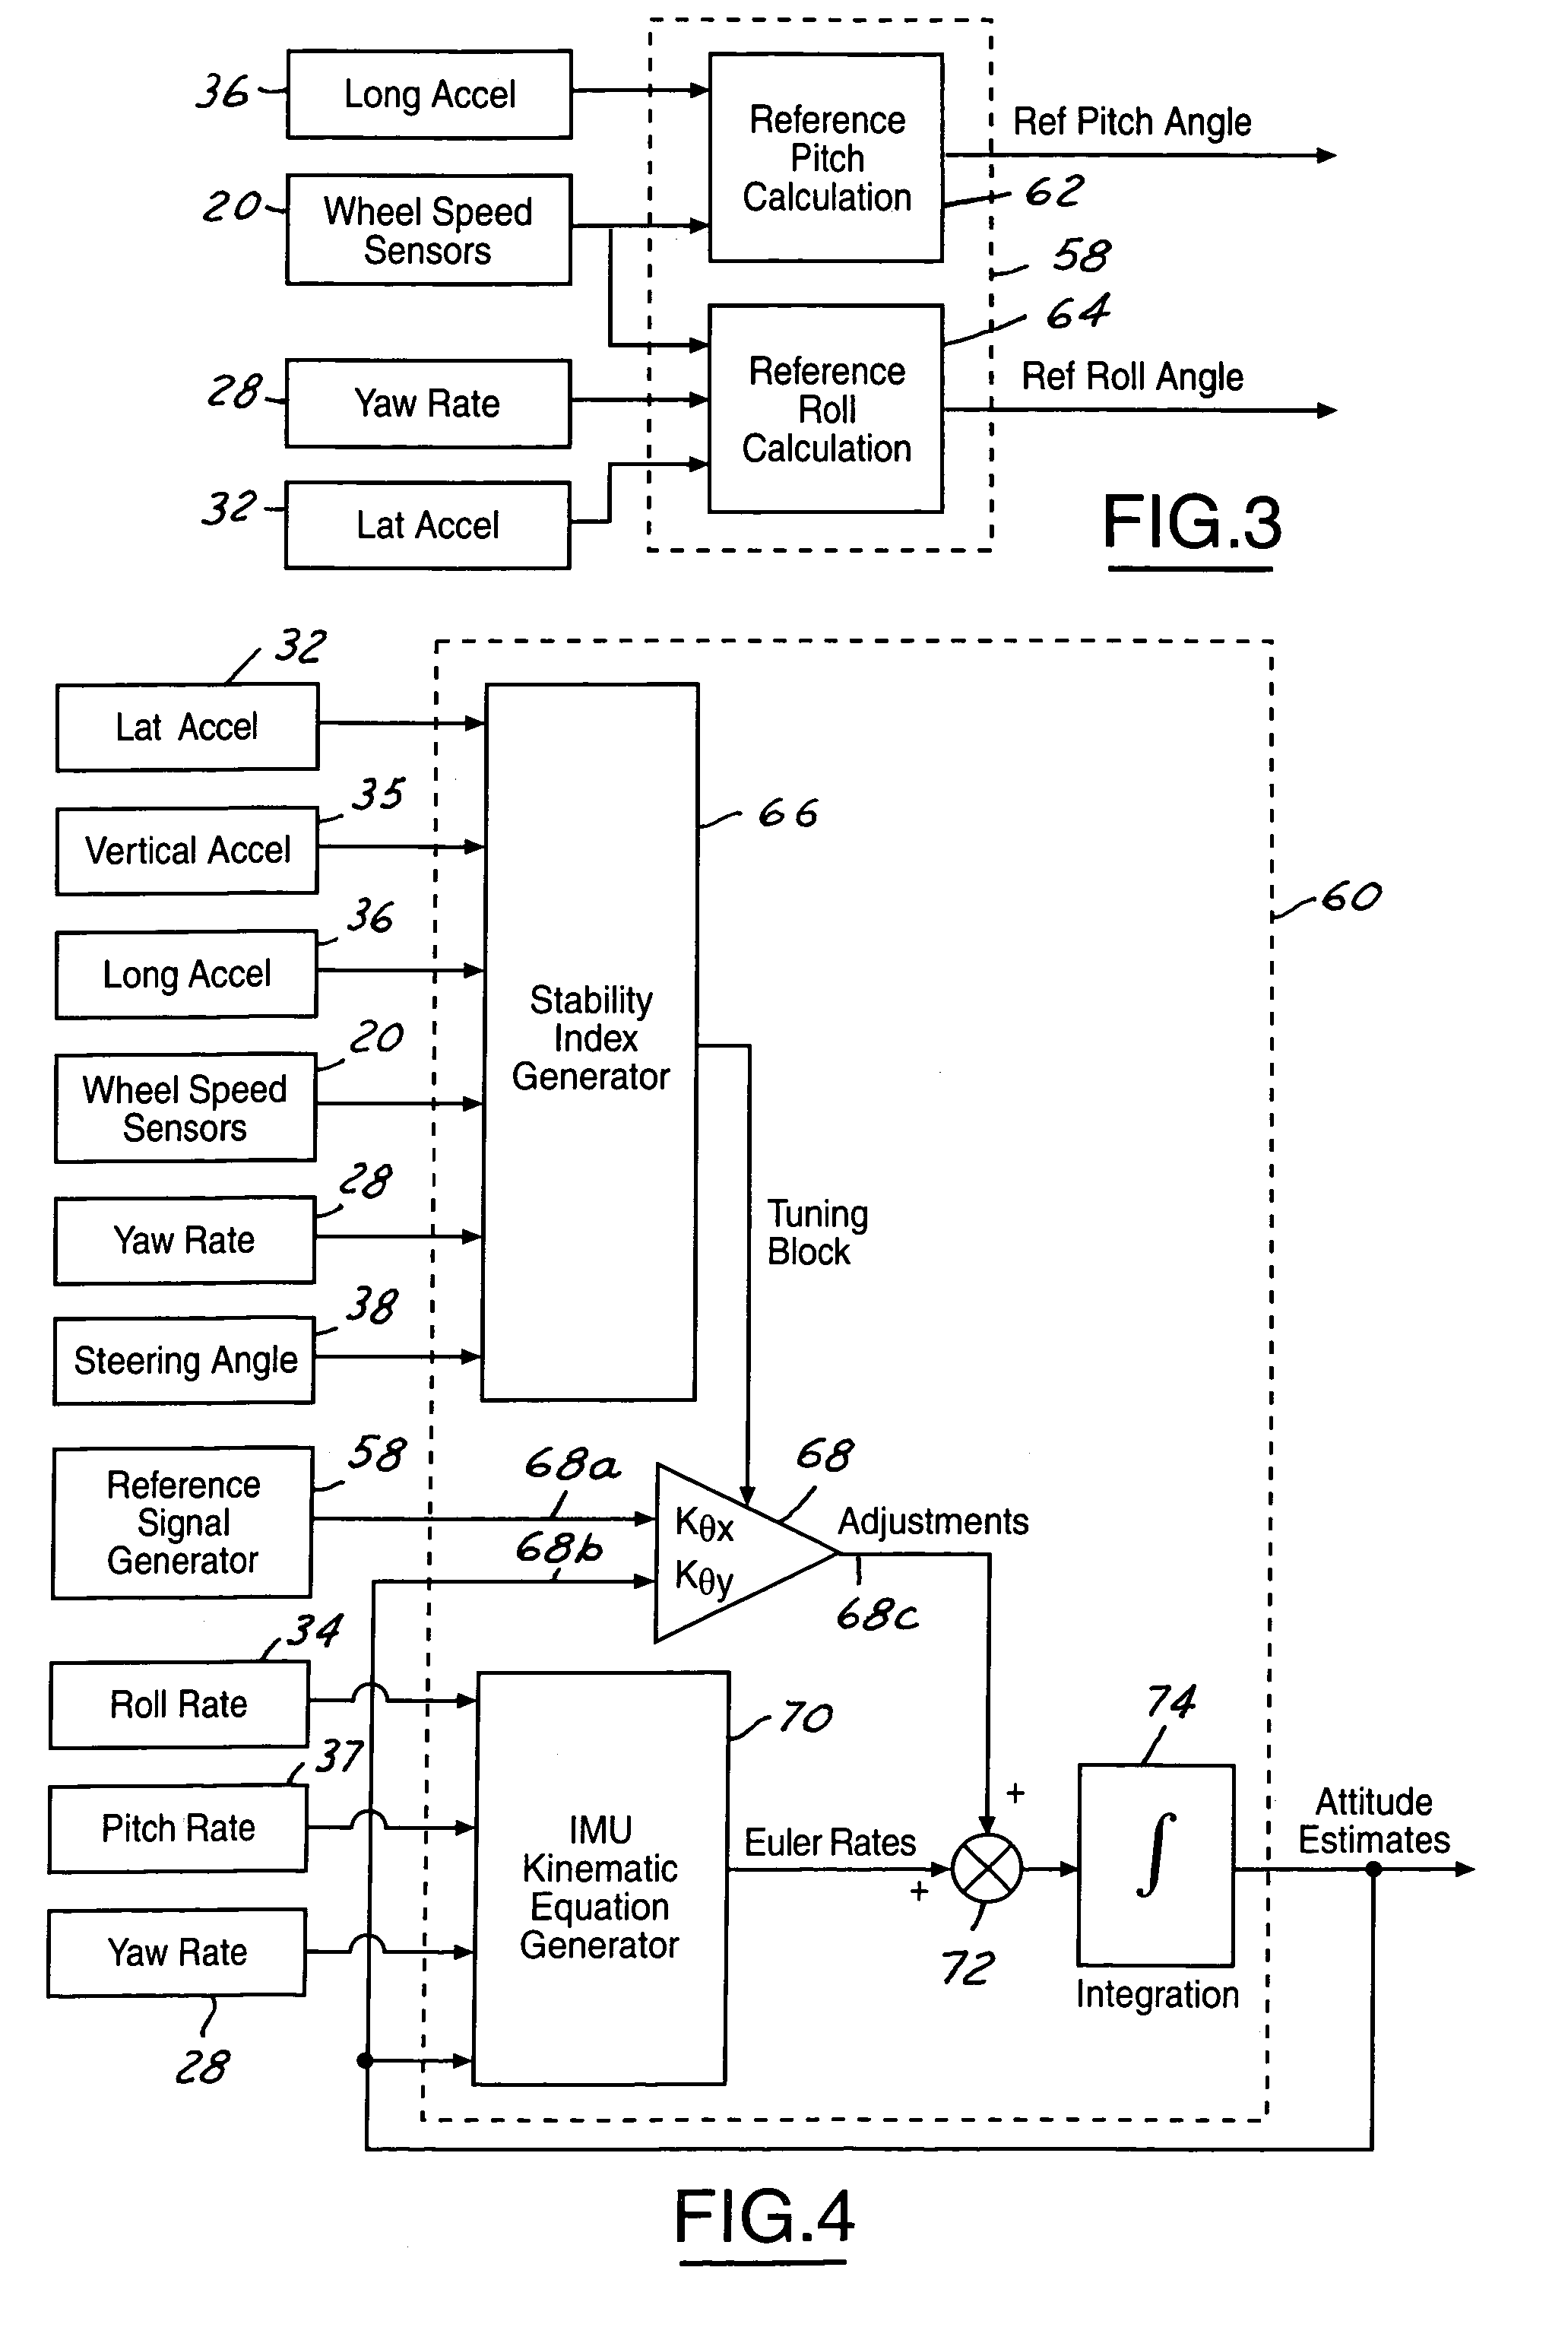 Attitude sensing system for an automotive vehicle relative to the road